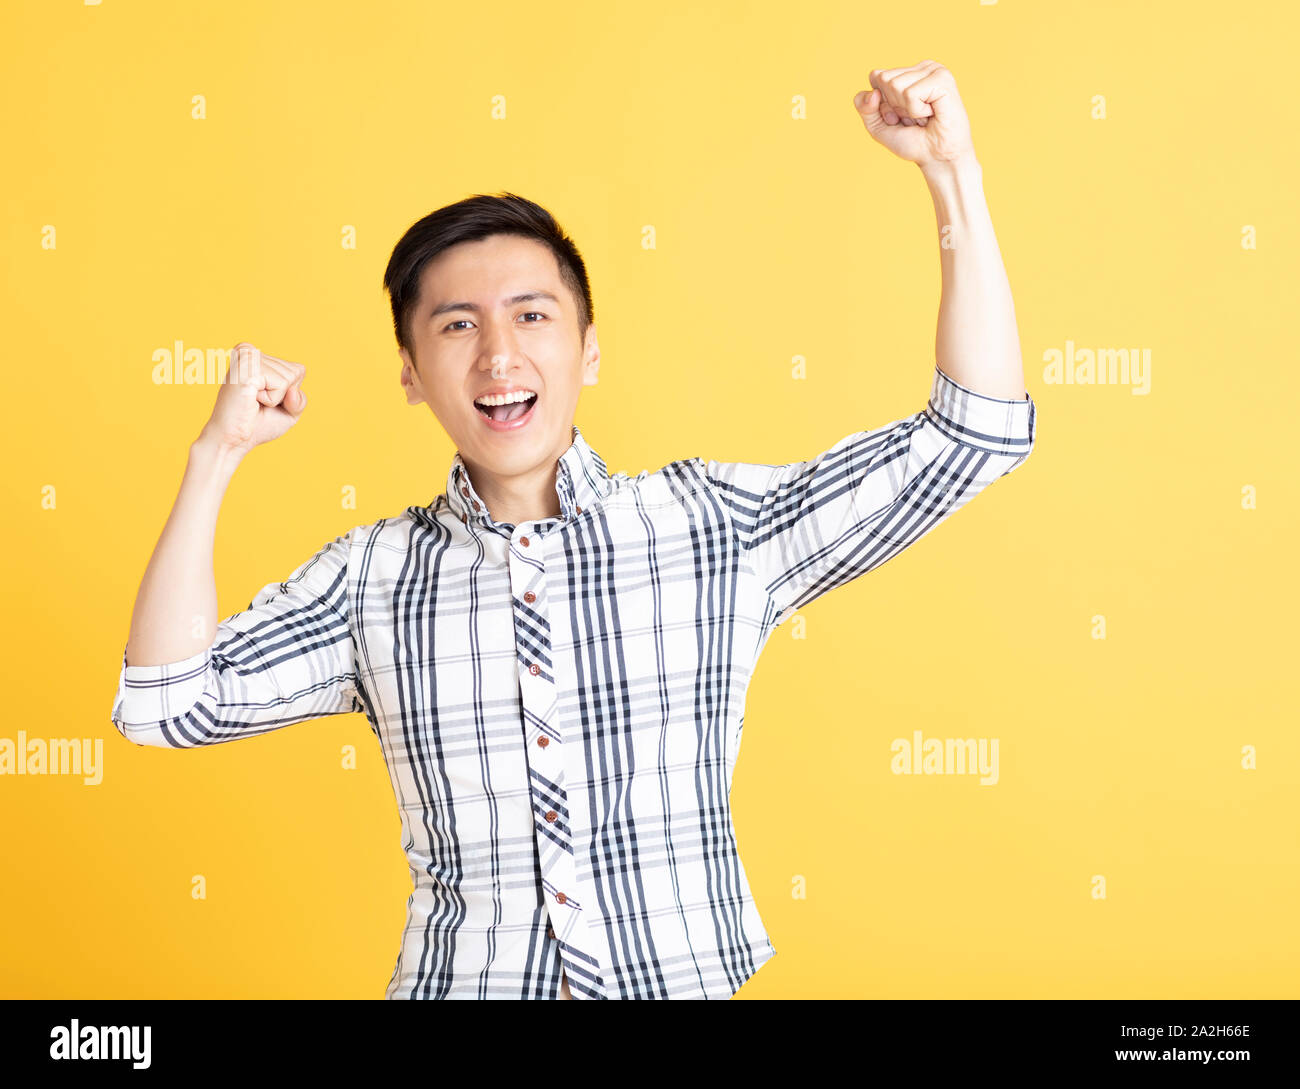 happy young man celebrating victory Stock Photo